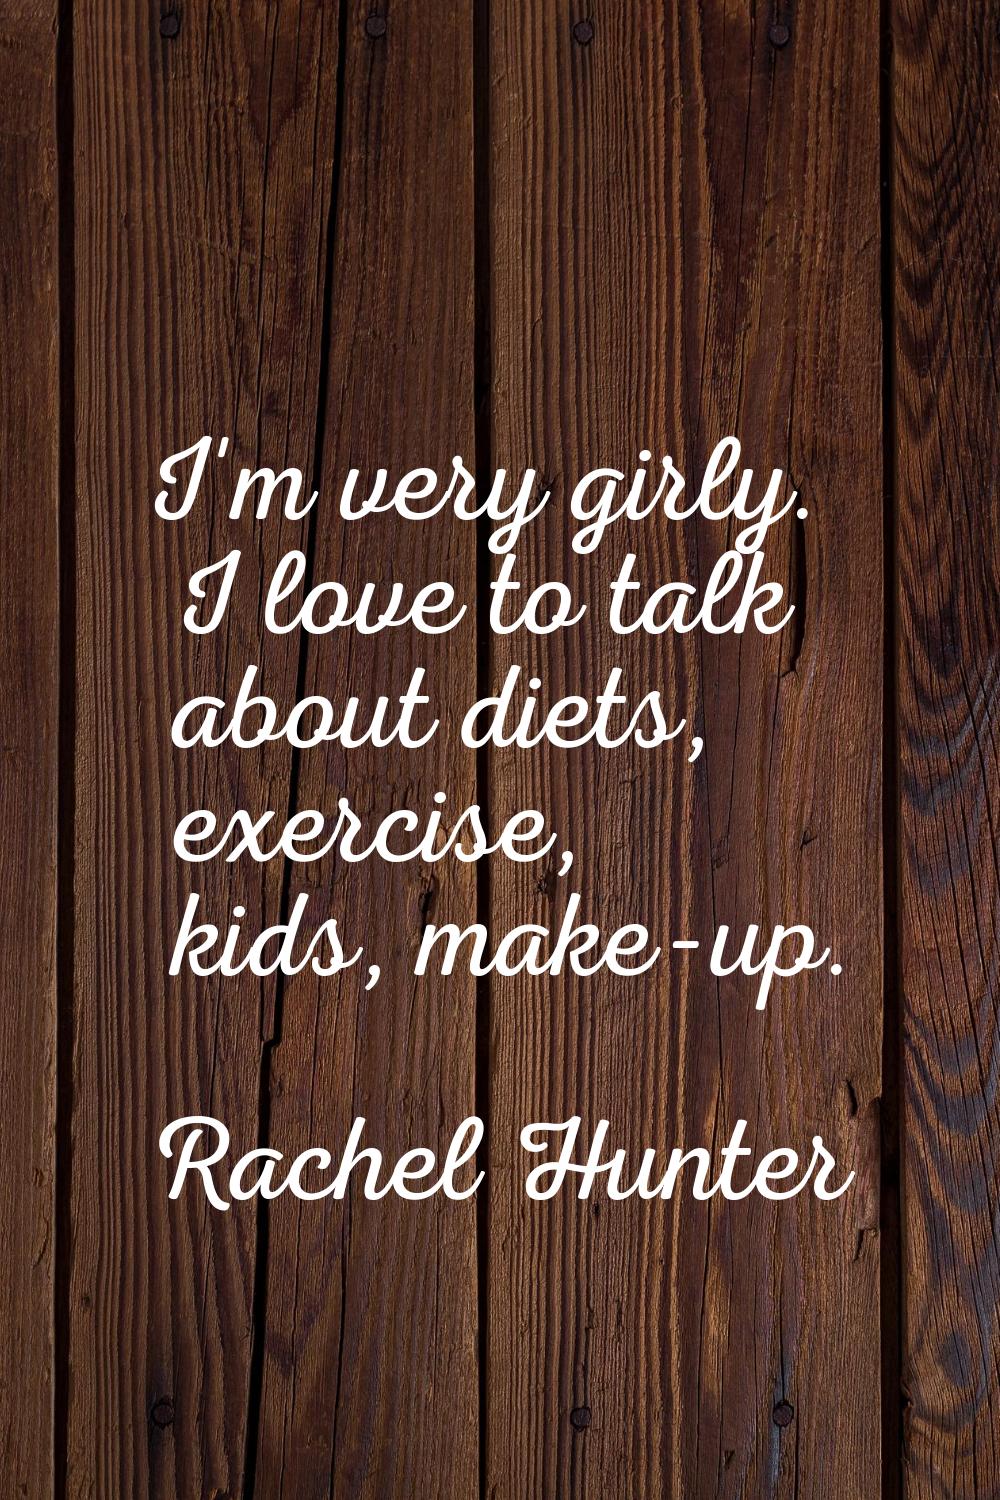 I'm very girly. I love to talk about diets, exercise, kids, make-up.